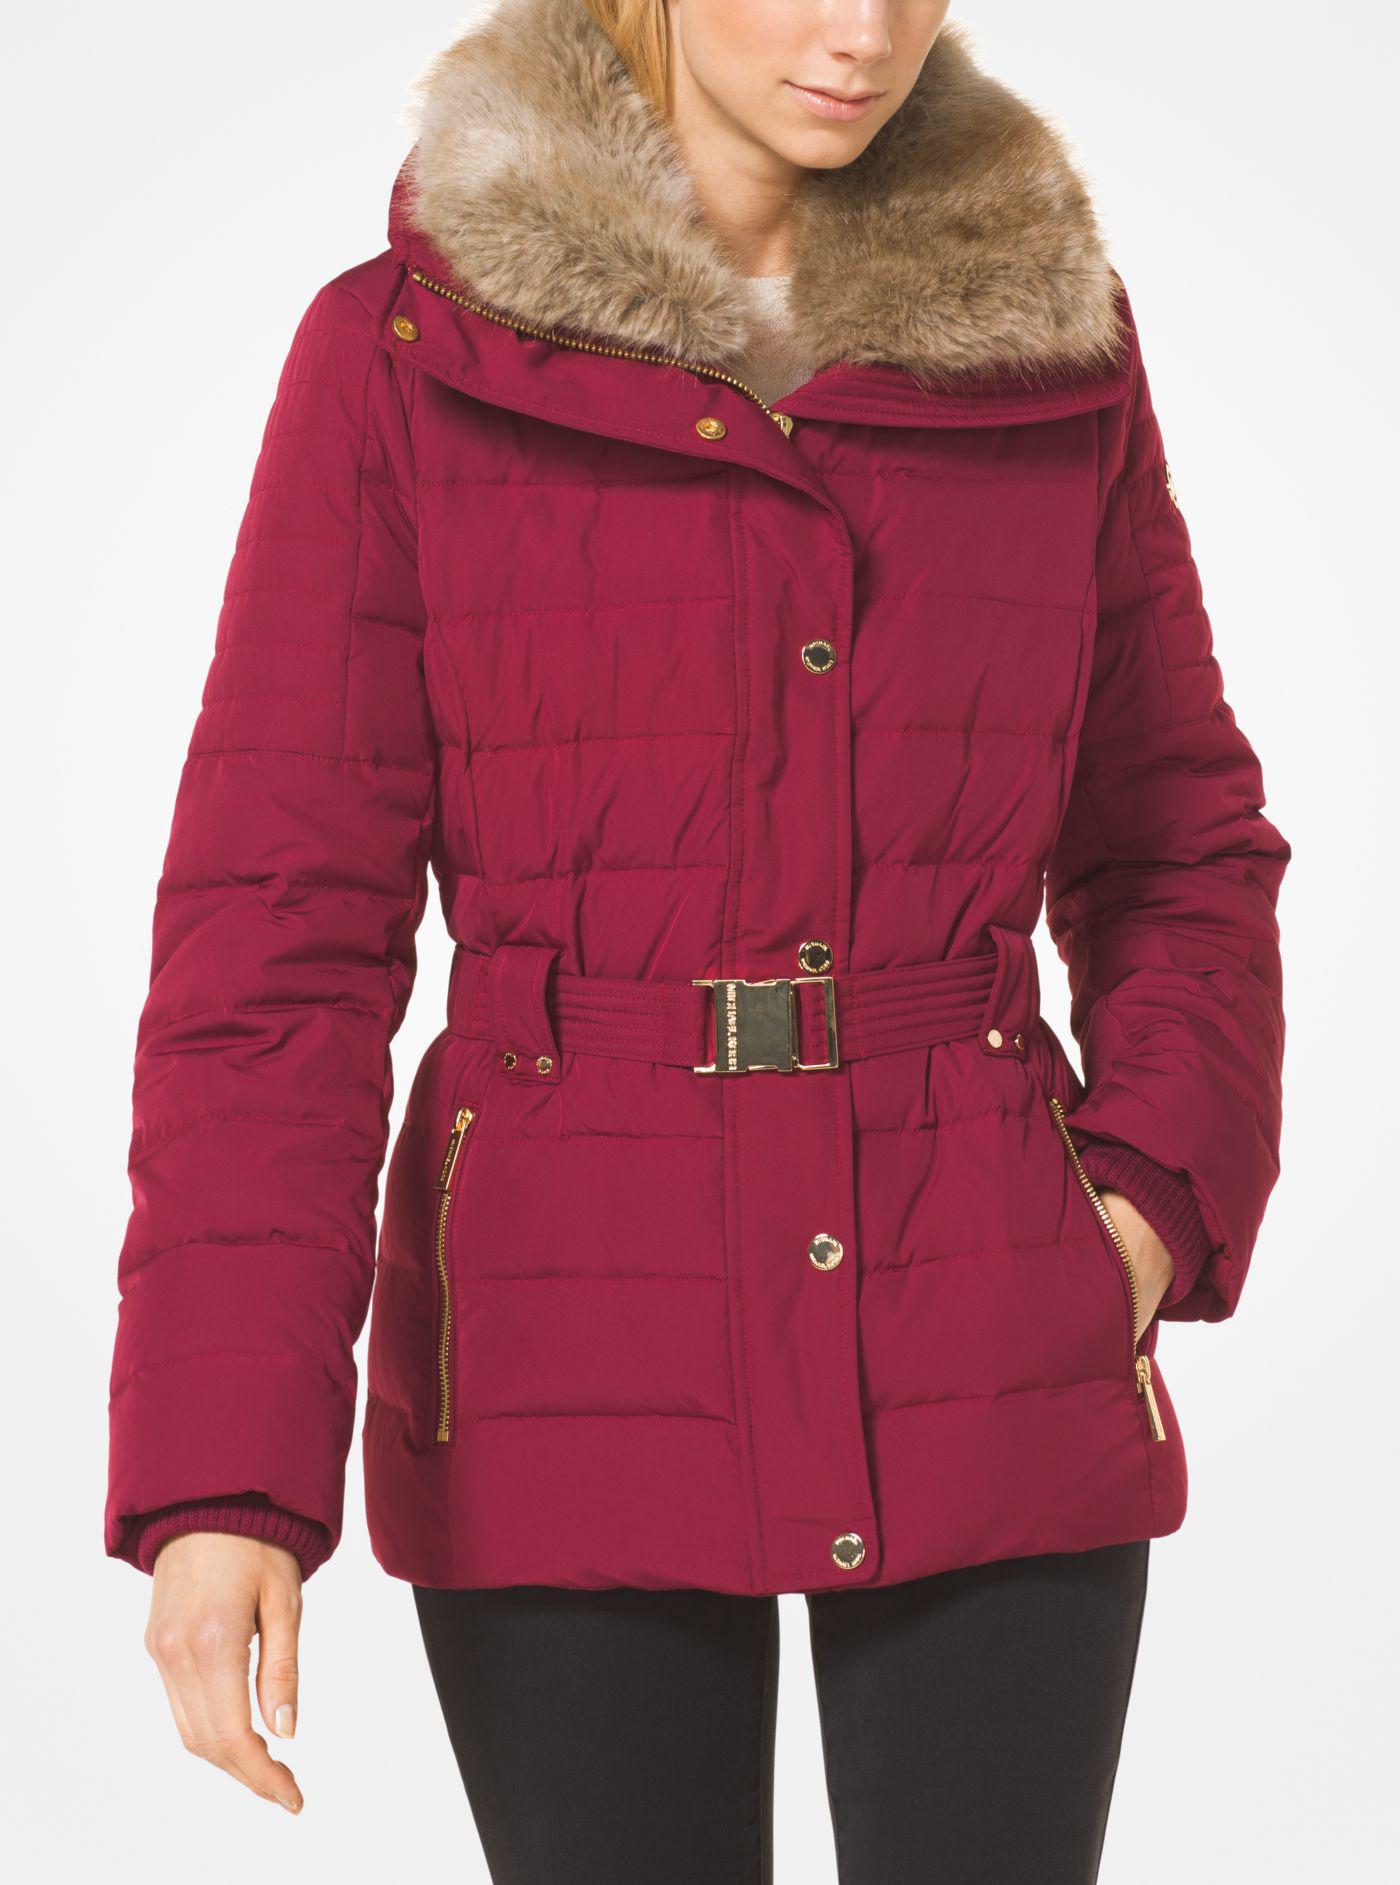 Michael Kors Quilted Down And Faux Fur Puffer Jacket in Burnt Red (Red) -  Lyst